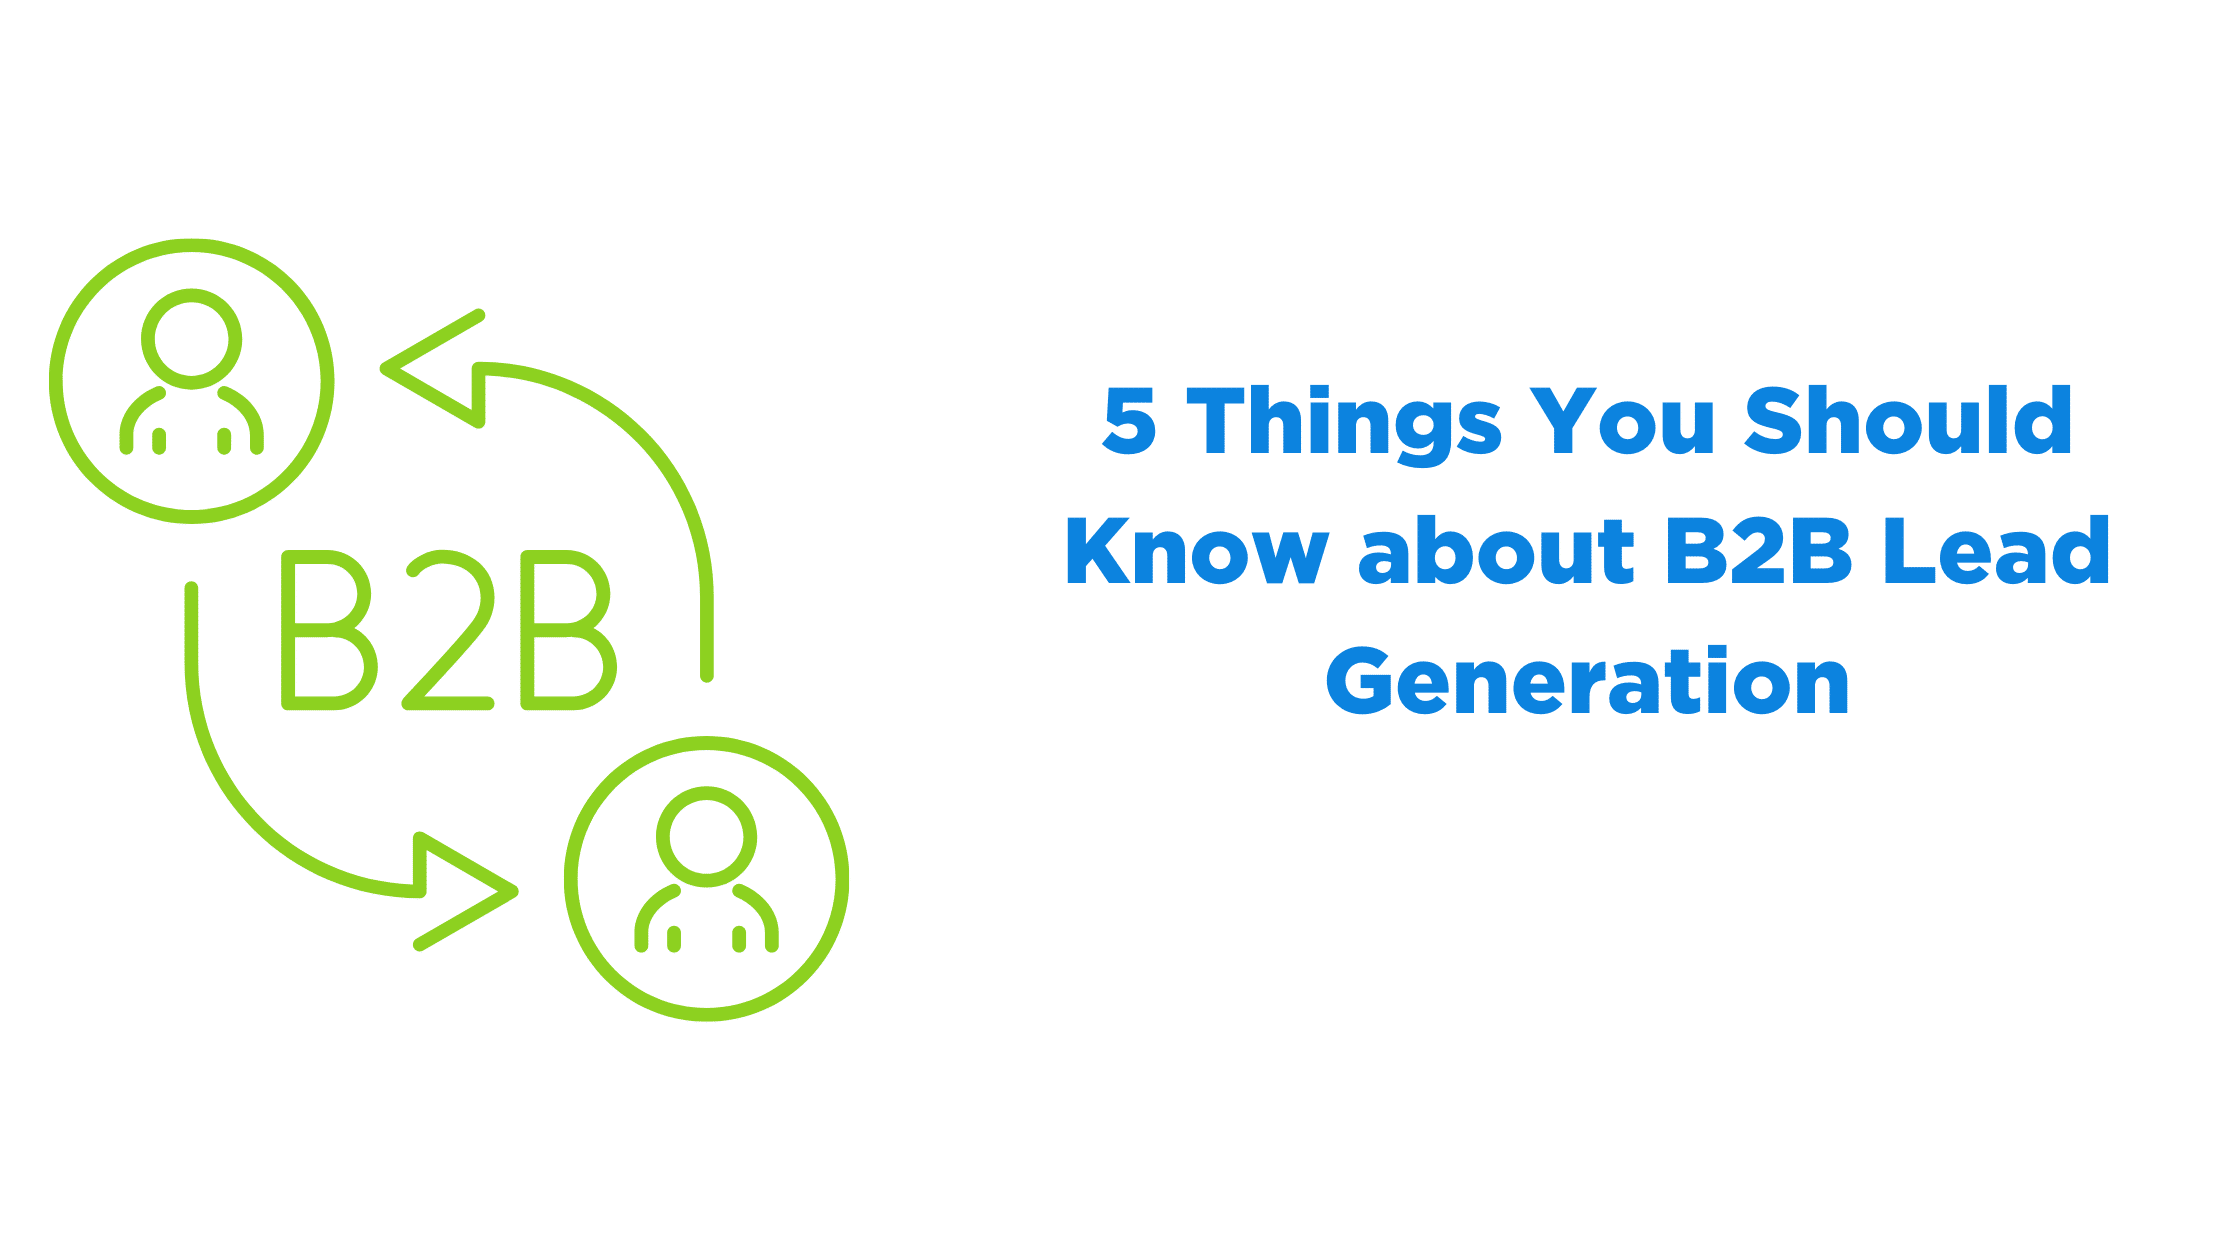 5 Things You Should Know About B2B Lead Generation